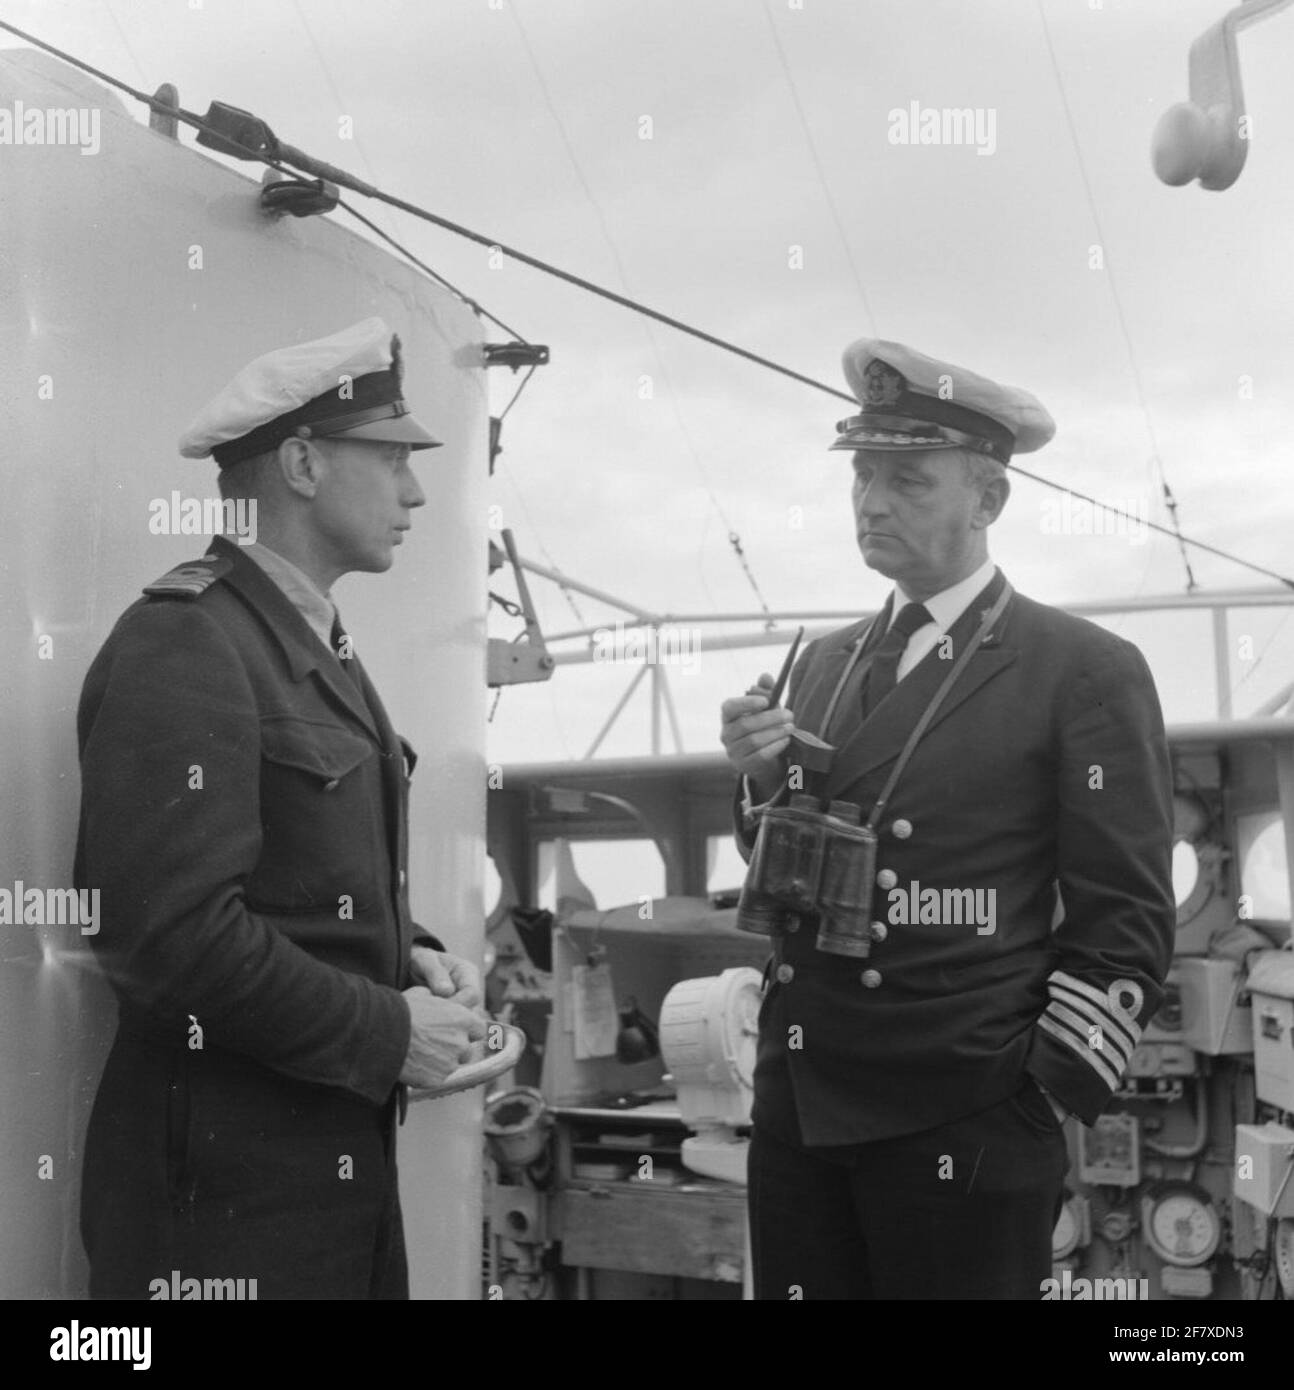 Adelborstenreizen 13 - 29 April, 10 - 16 June and 3 -31 July 1953. The commander of HR. Ms. Tromp, captain at sea c.w.th. Baron van Boetzelaer (right), in conversation with lieutenant at sea J. Ptasnik on the bridge of from HR Ms. Tromp (1948-1954). Is part of Object series AVDKM 530003 up to 530023 and 530051 to 530053. Stock Photo